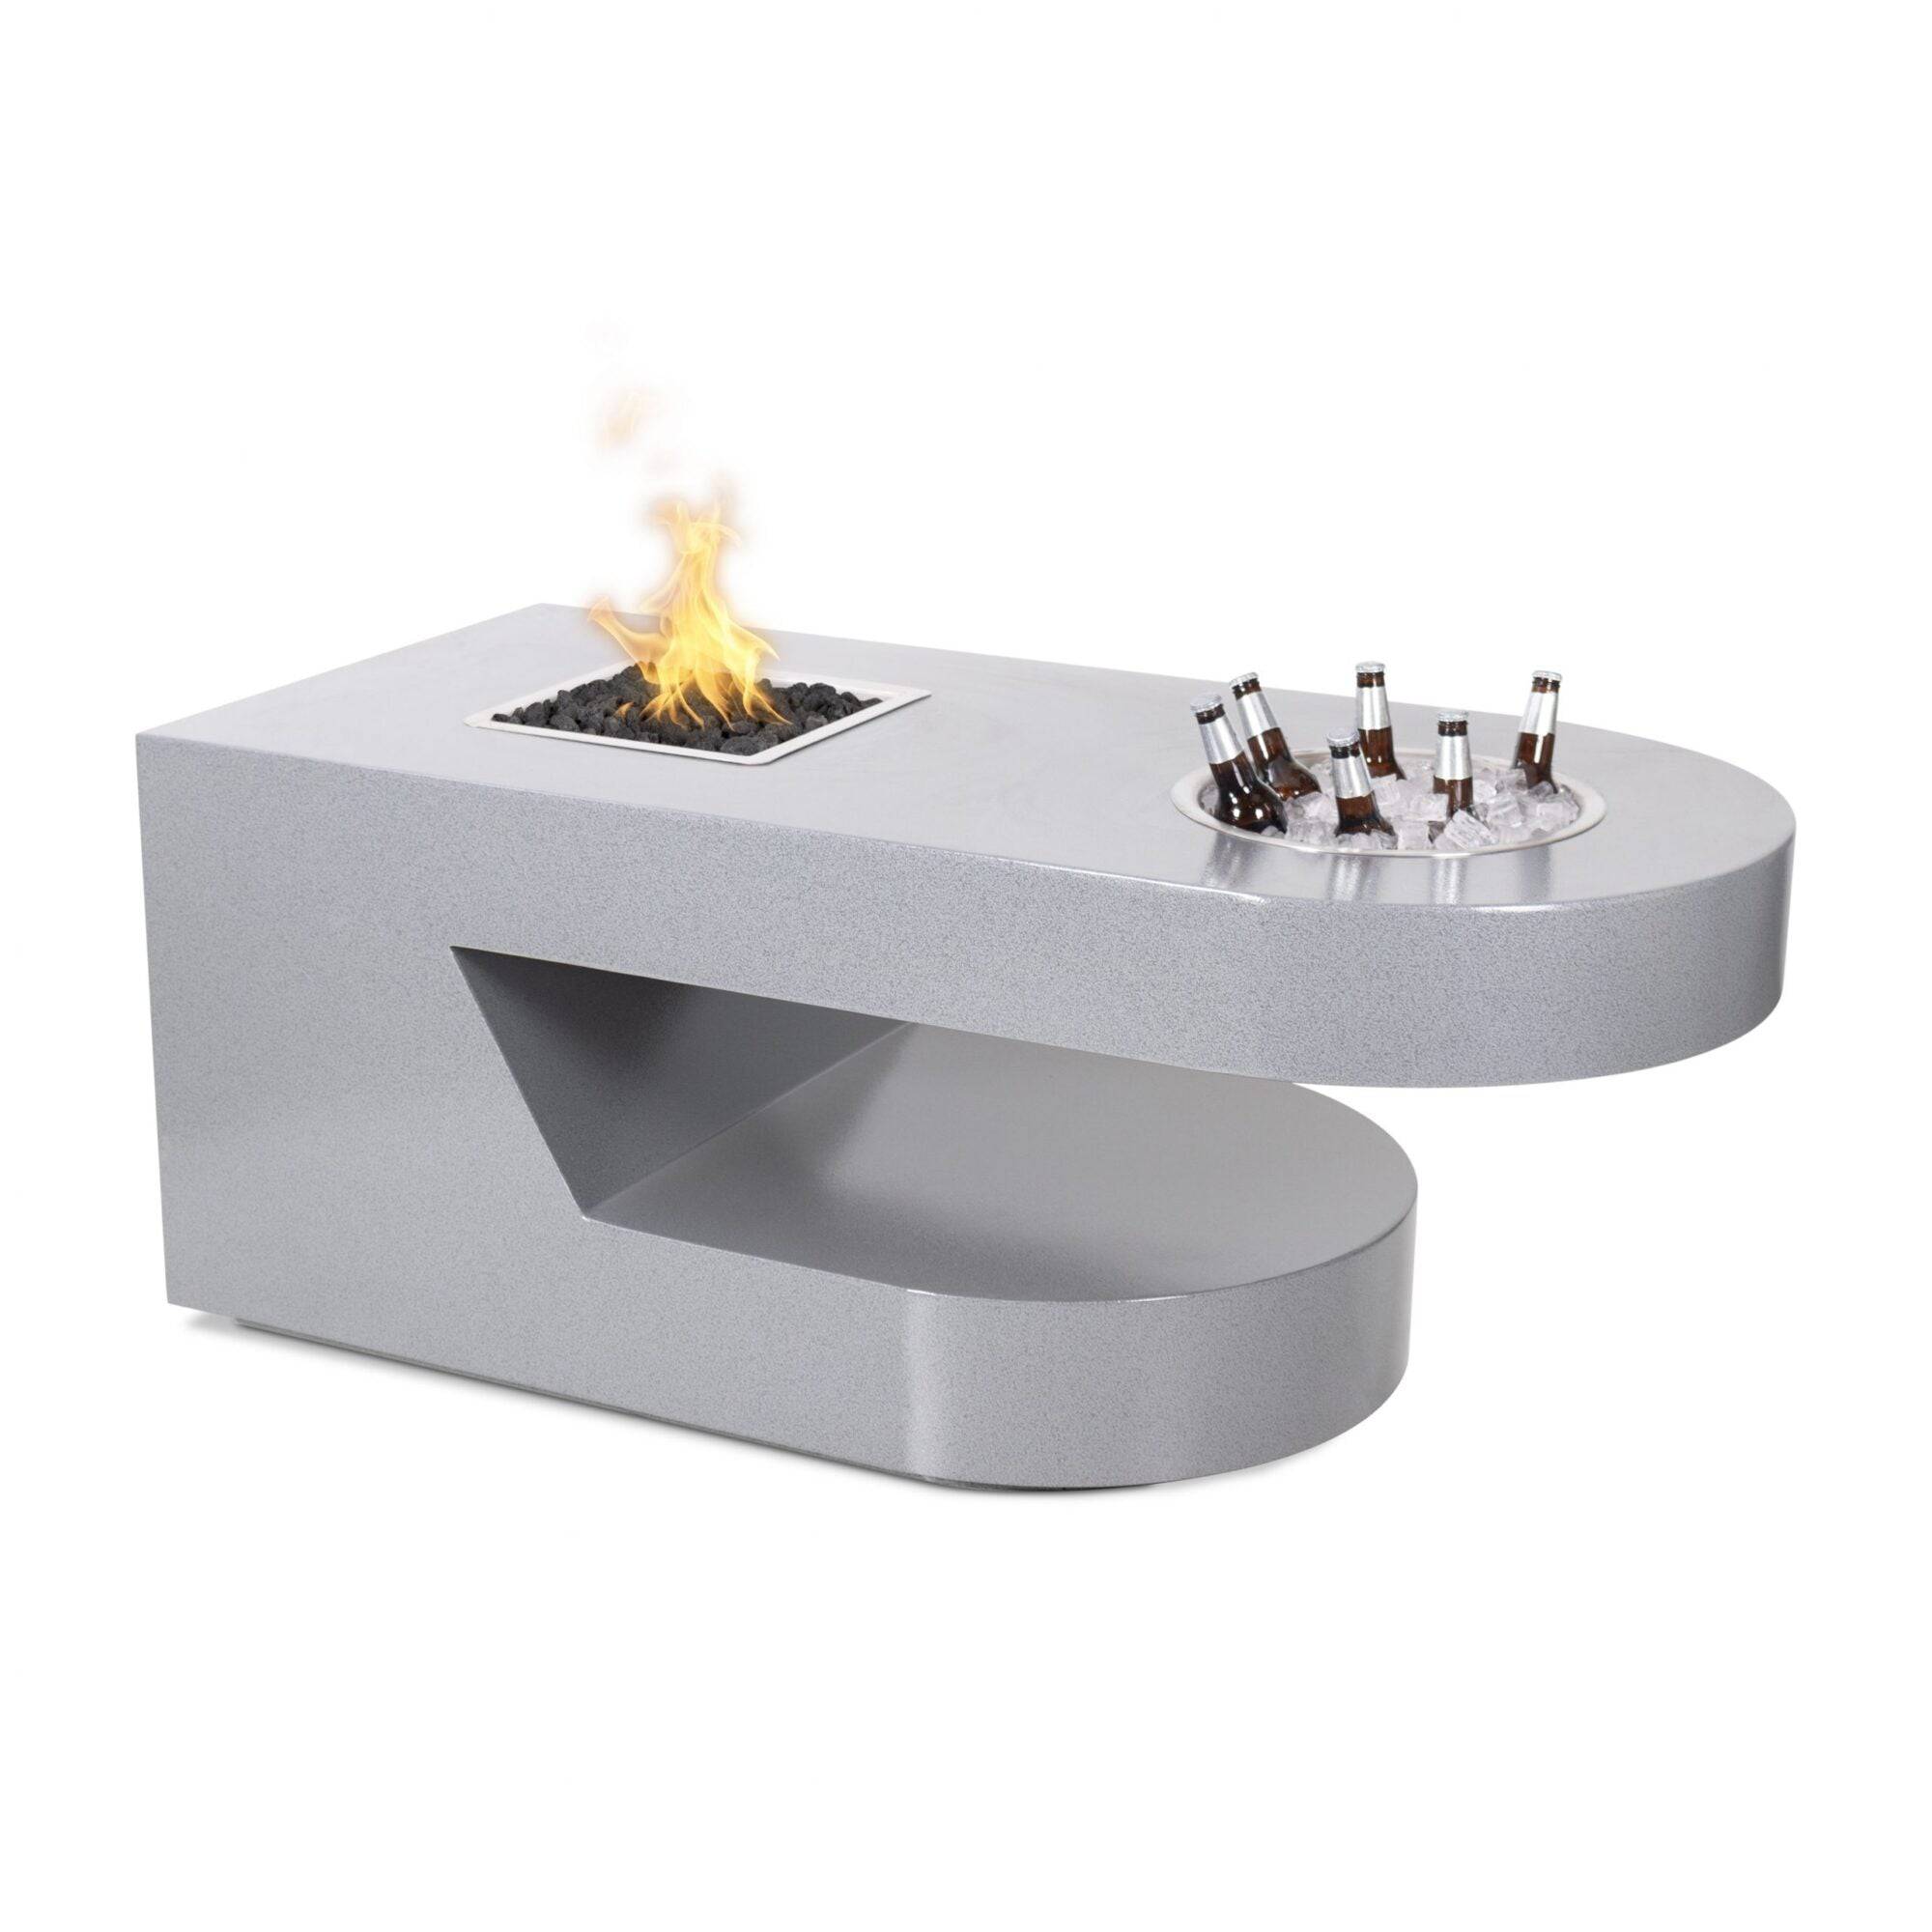 The Outdoor Plus Dana Fire Pit Hammered Copper OPT-DANCPR60 - Serenity Provision